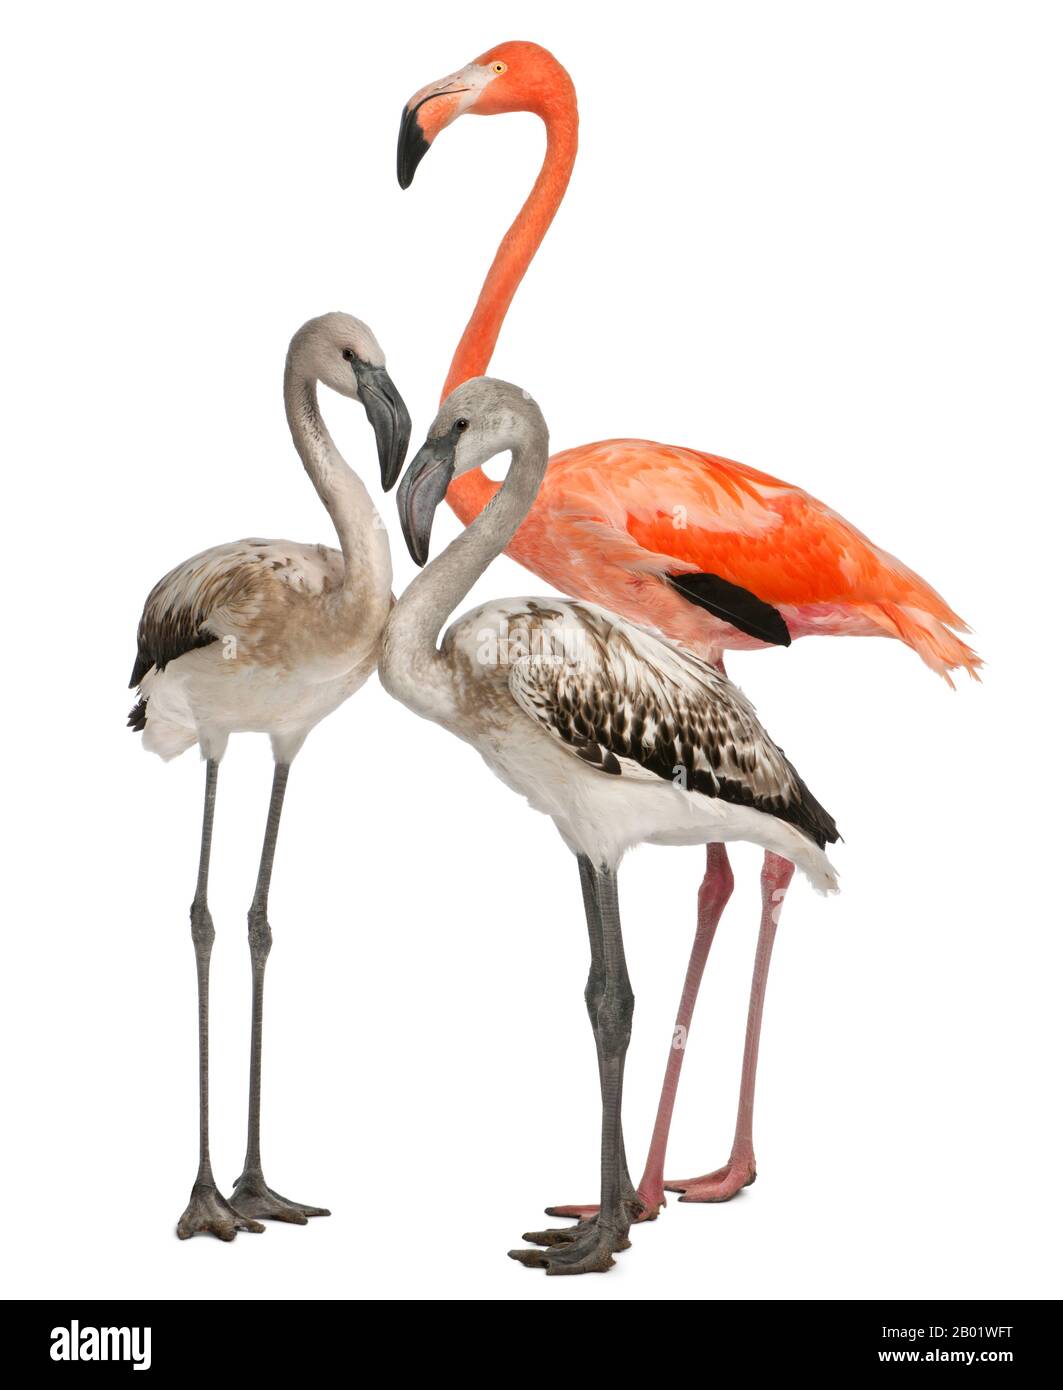 Greater Flamingo, Phoenicopterus roseus, 8 months old, and American Flamingo, Phoenicopterus ruber, 10 years old, in front of white background Stock Photo